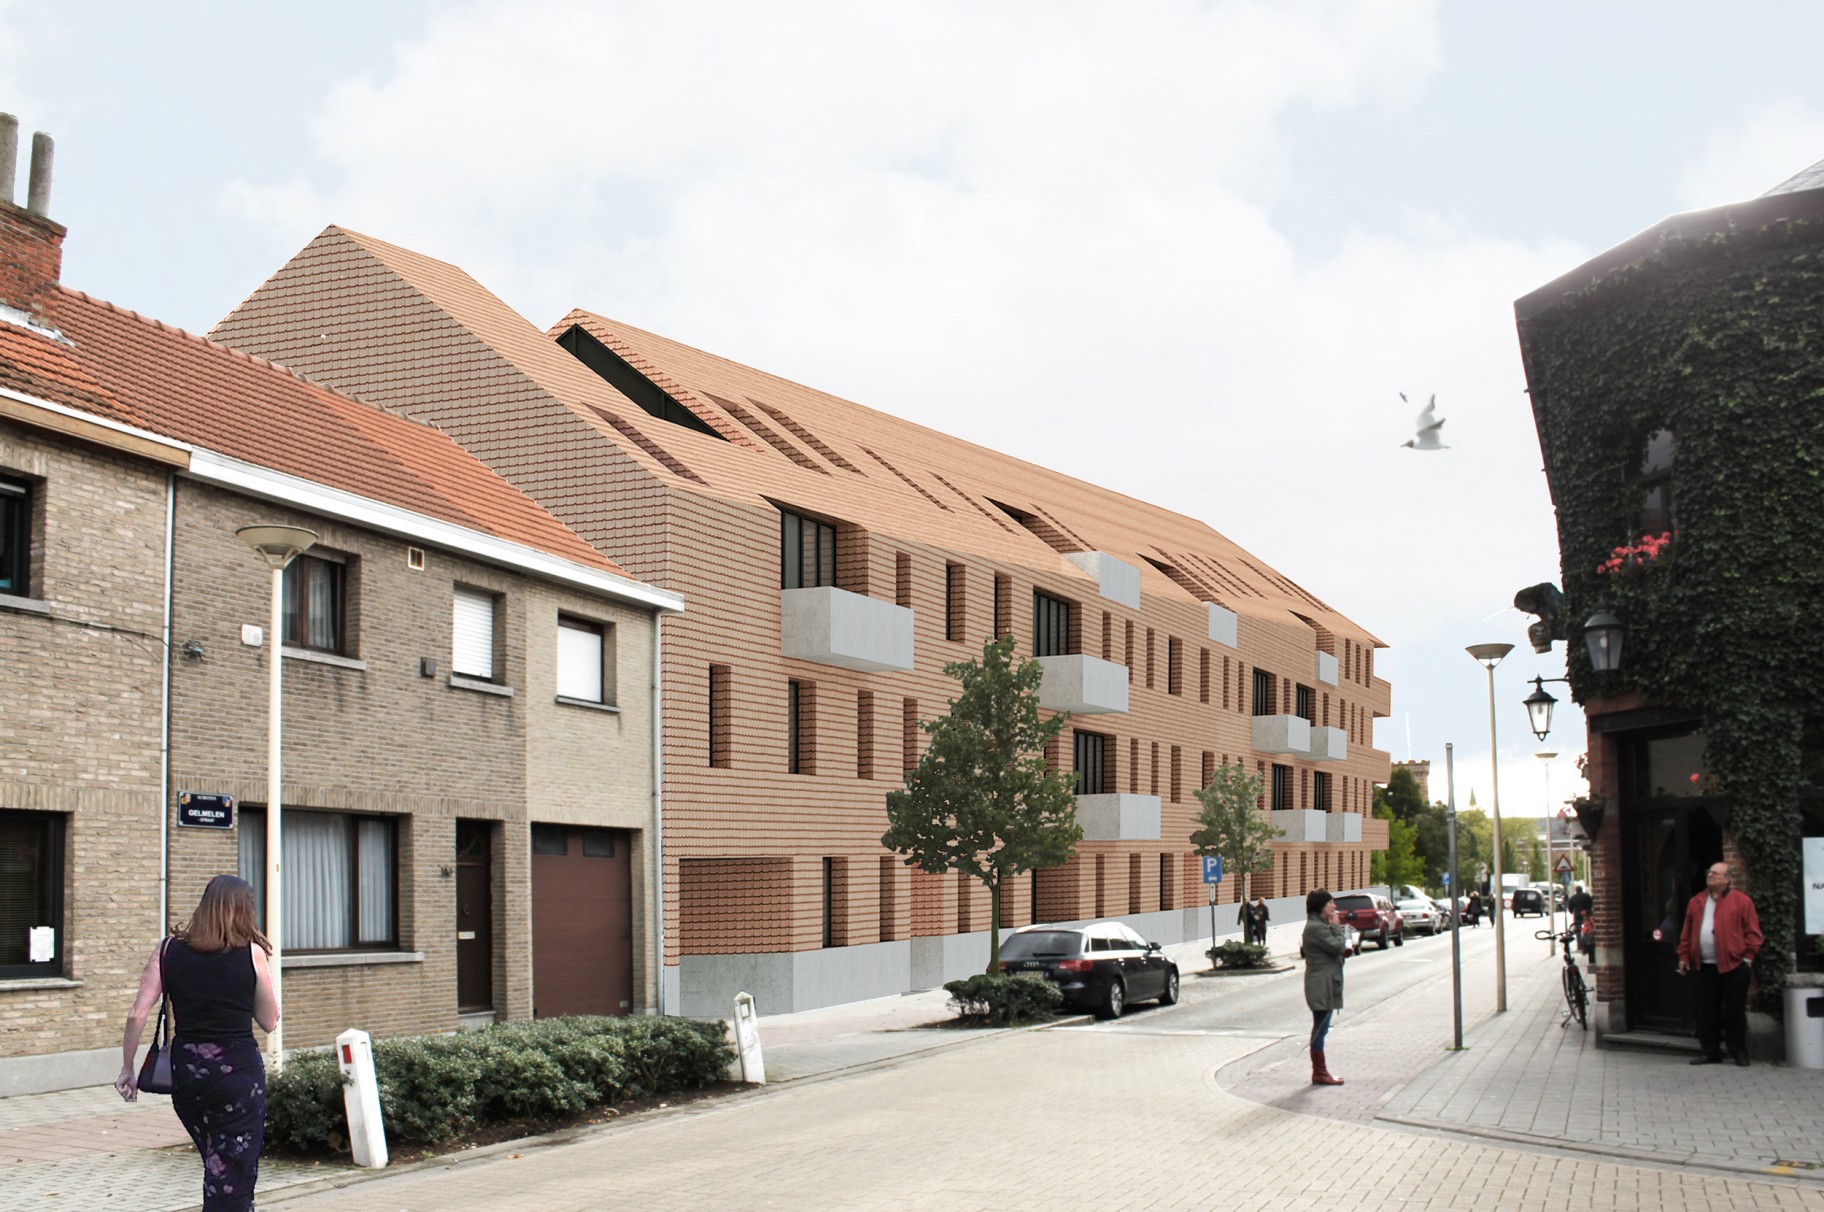 Competition Sociale woningen Gelmelenstraat submitted